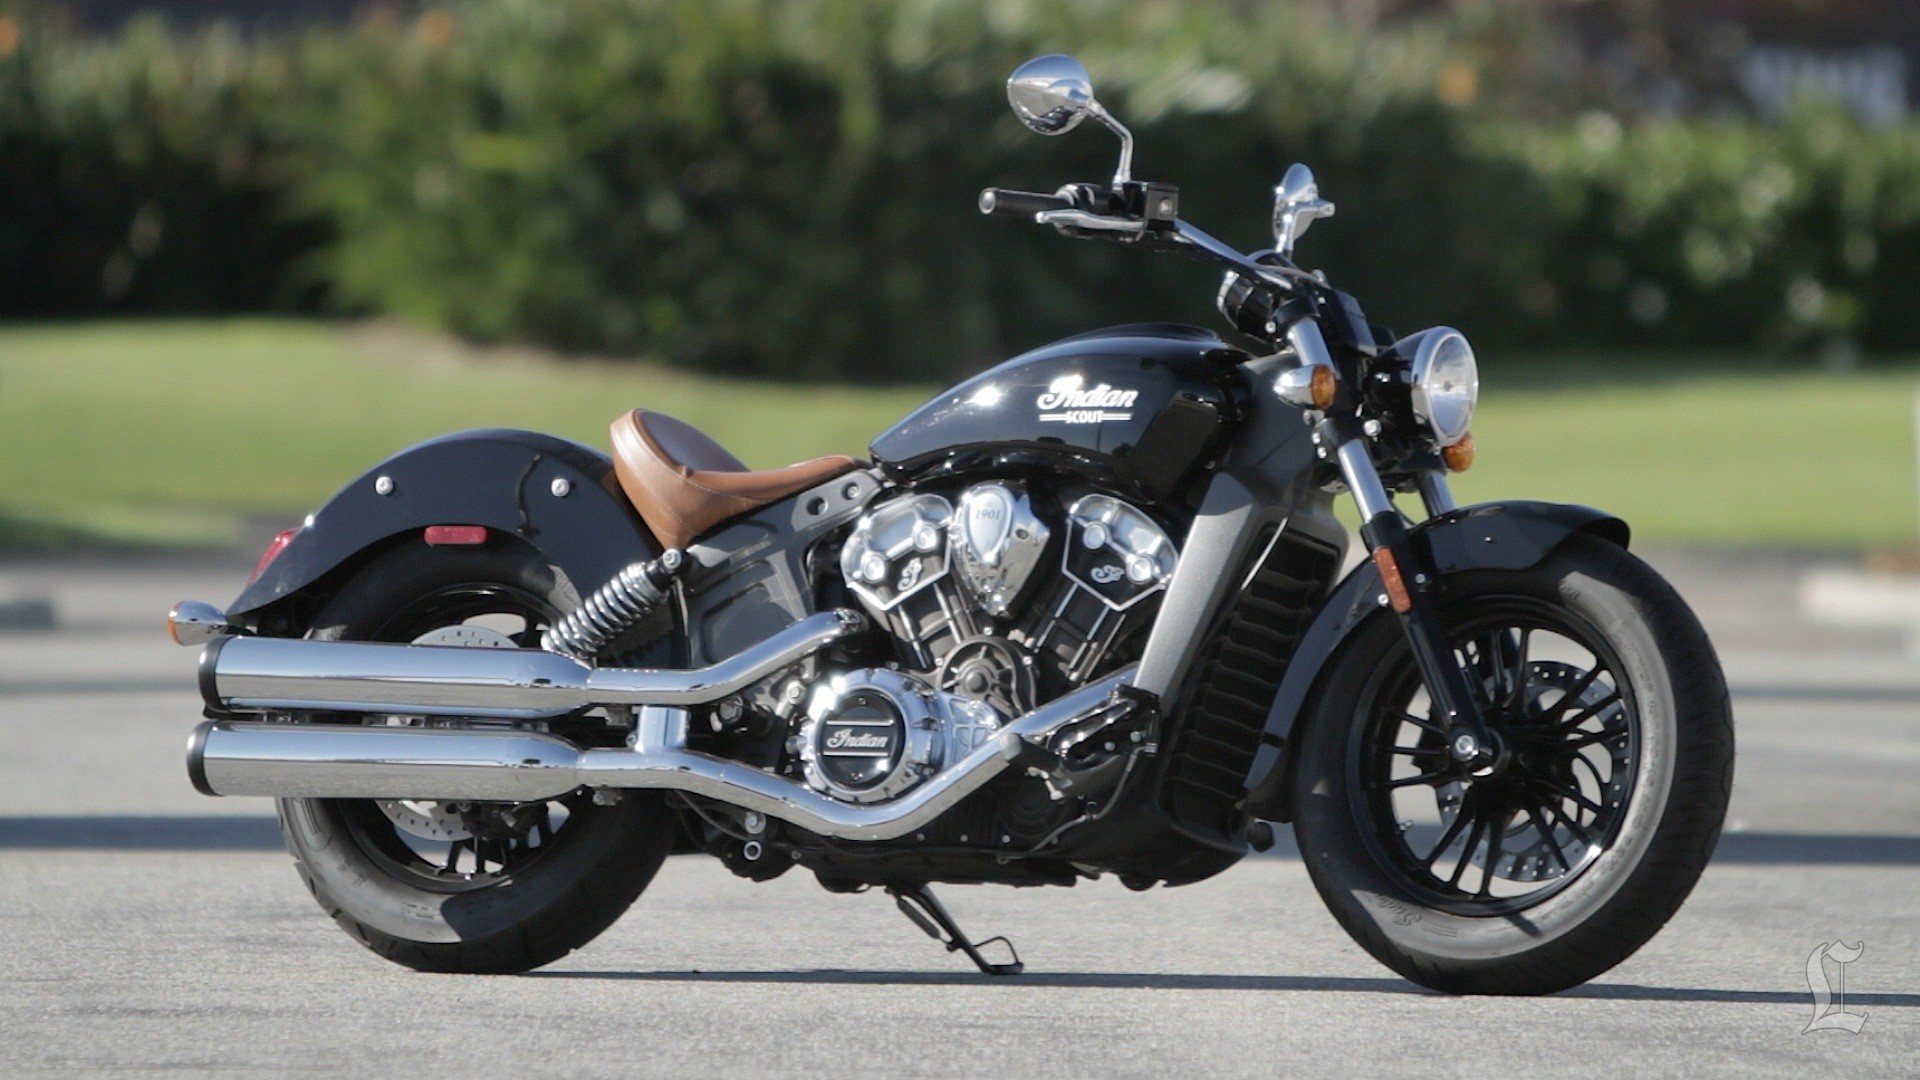 la-fi-hy-first-ride-2015-indian-scout-20140924